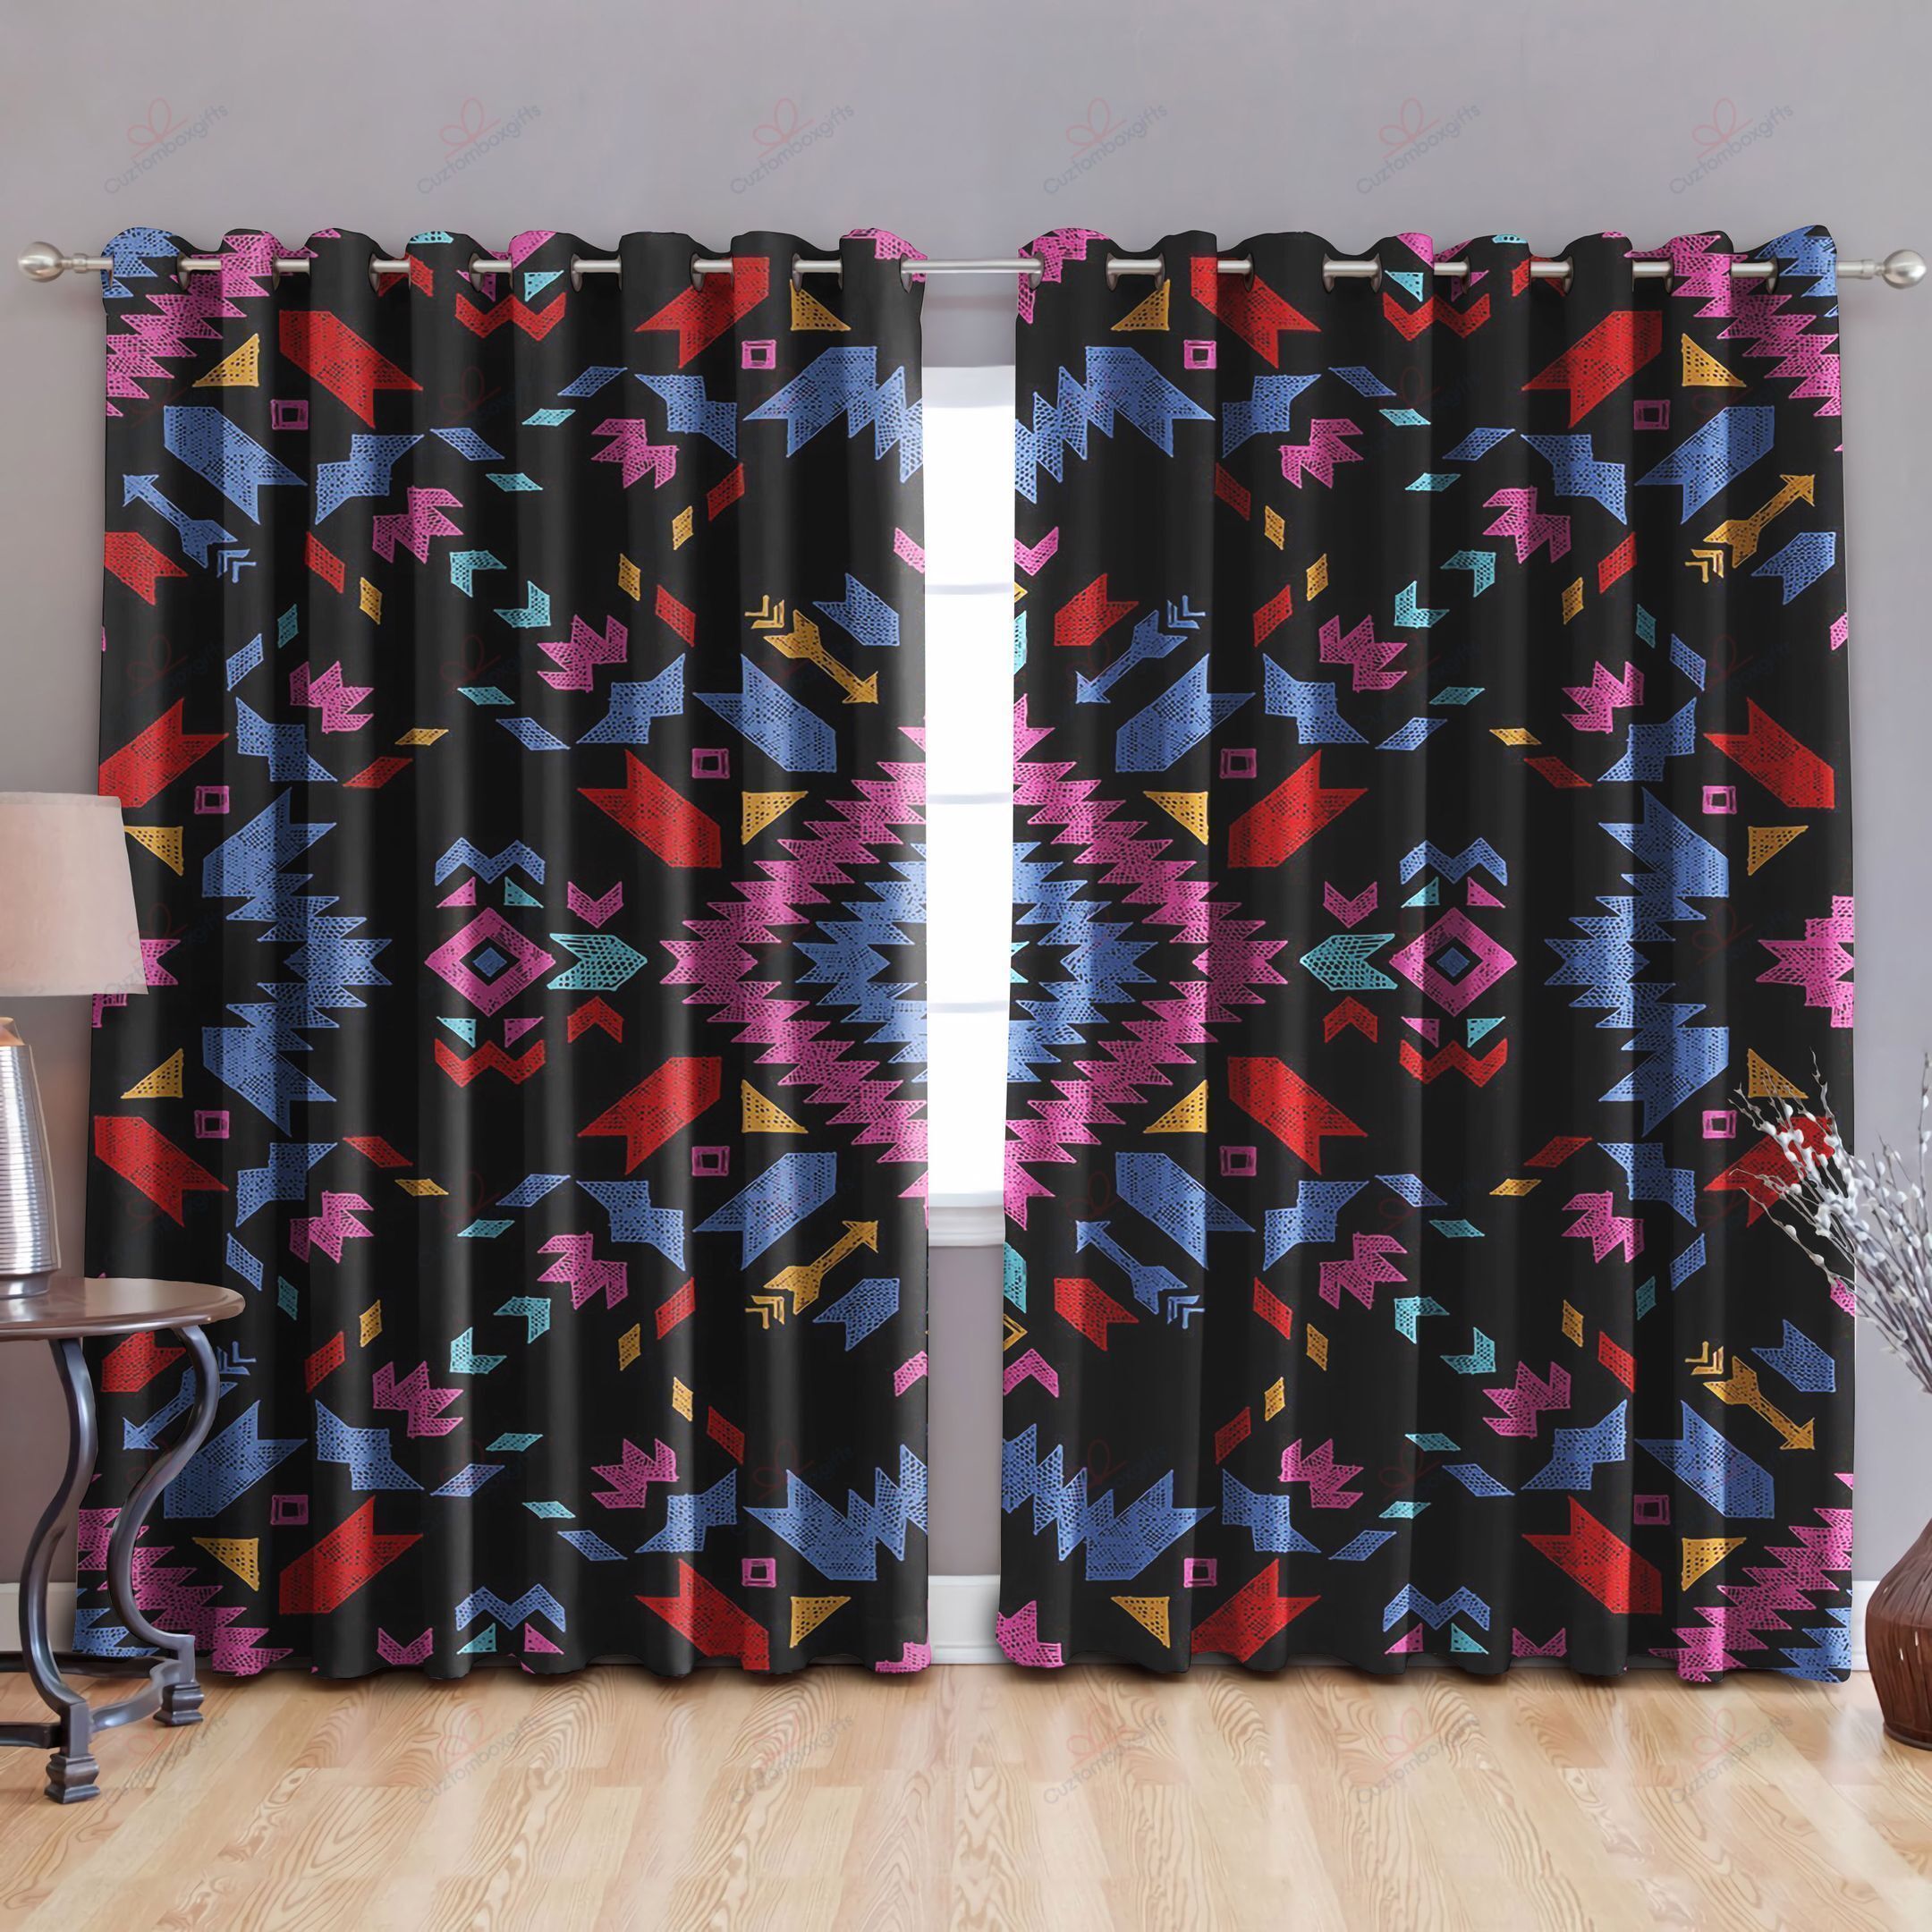 Colorful Tribal Ethnic Printed Window Curtain Home Decor